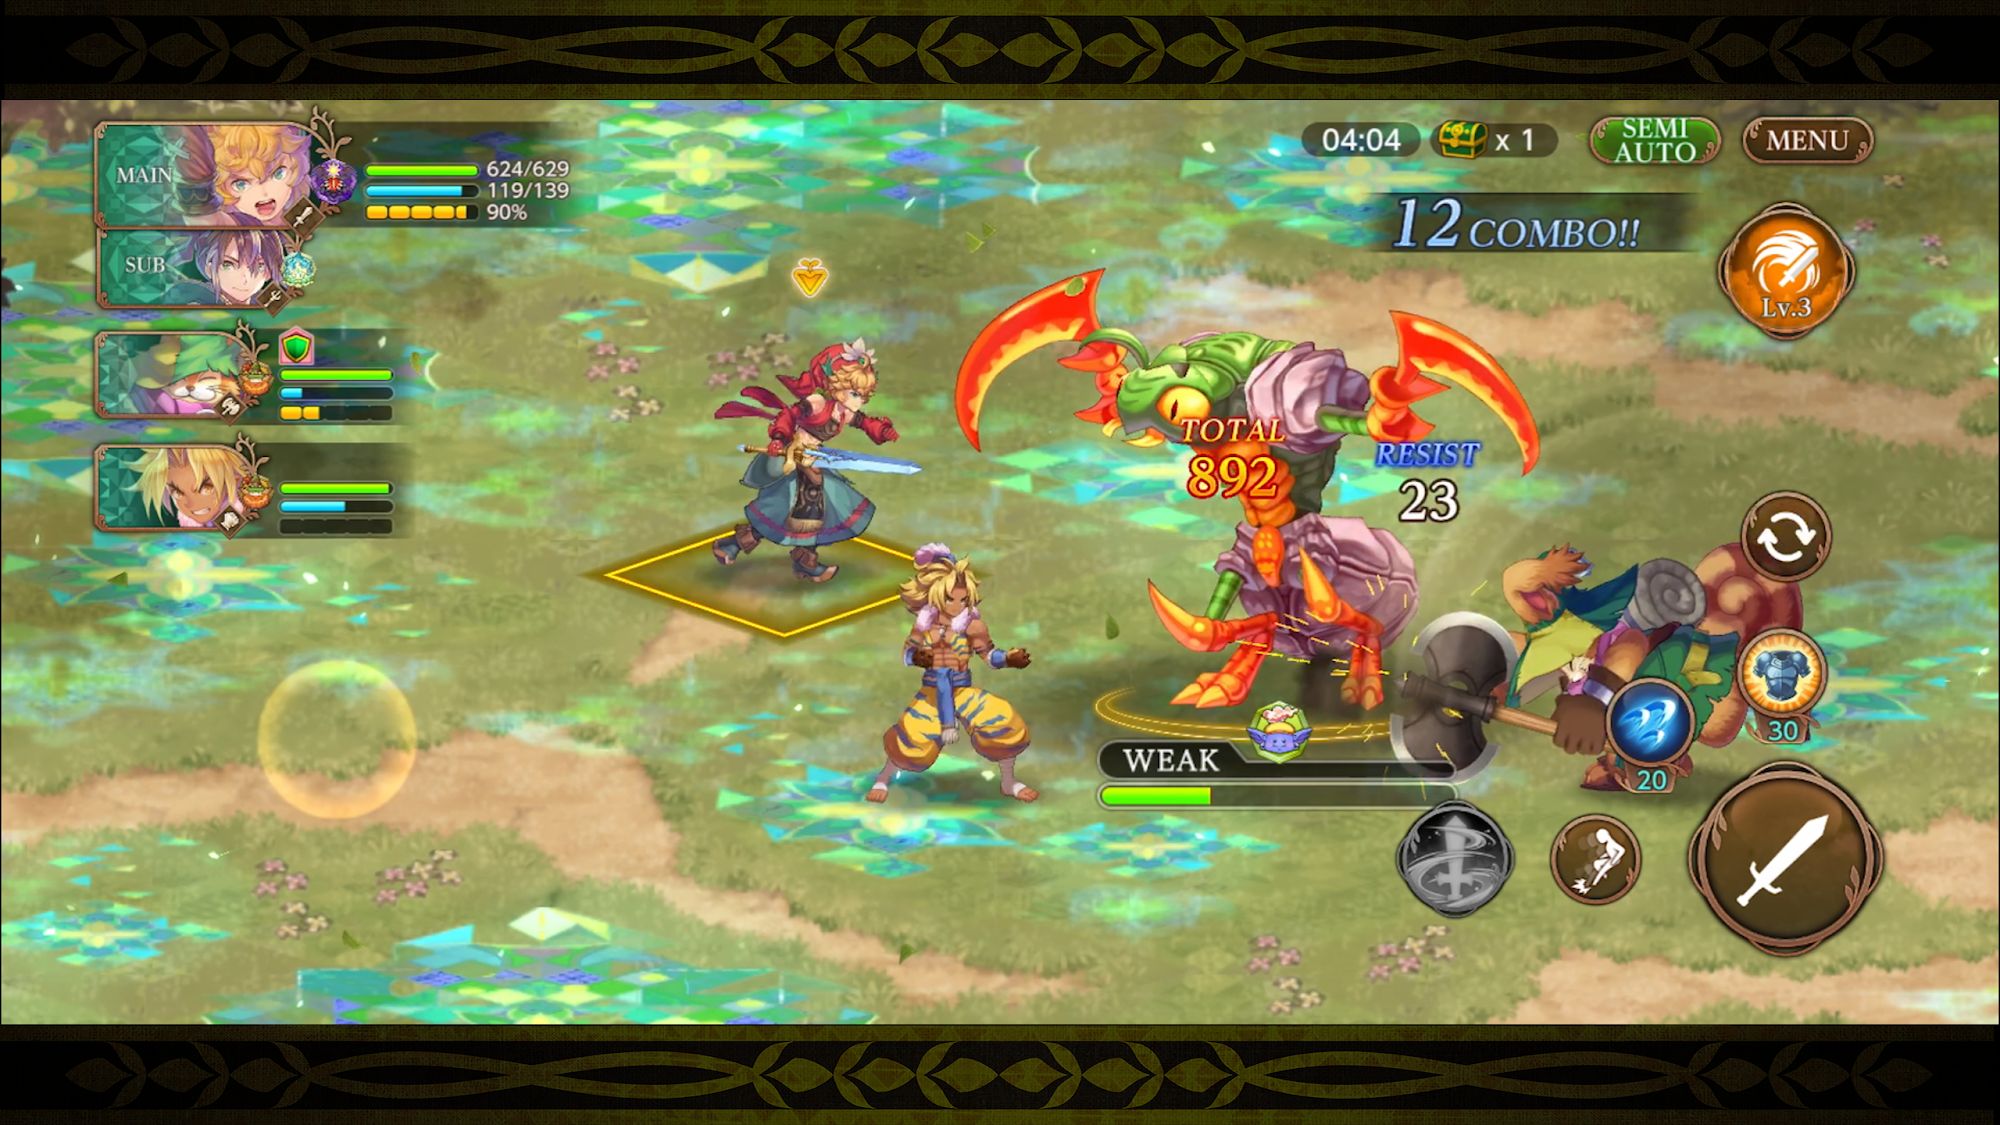 Gameplay of the ECHOES of MANA for Android phone or tablet.